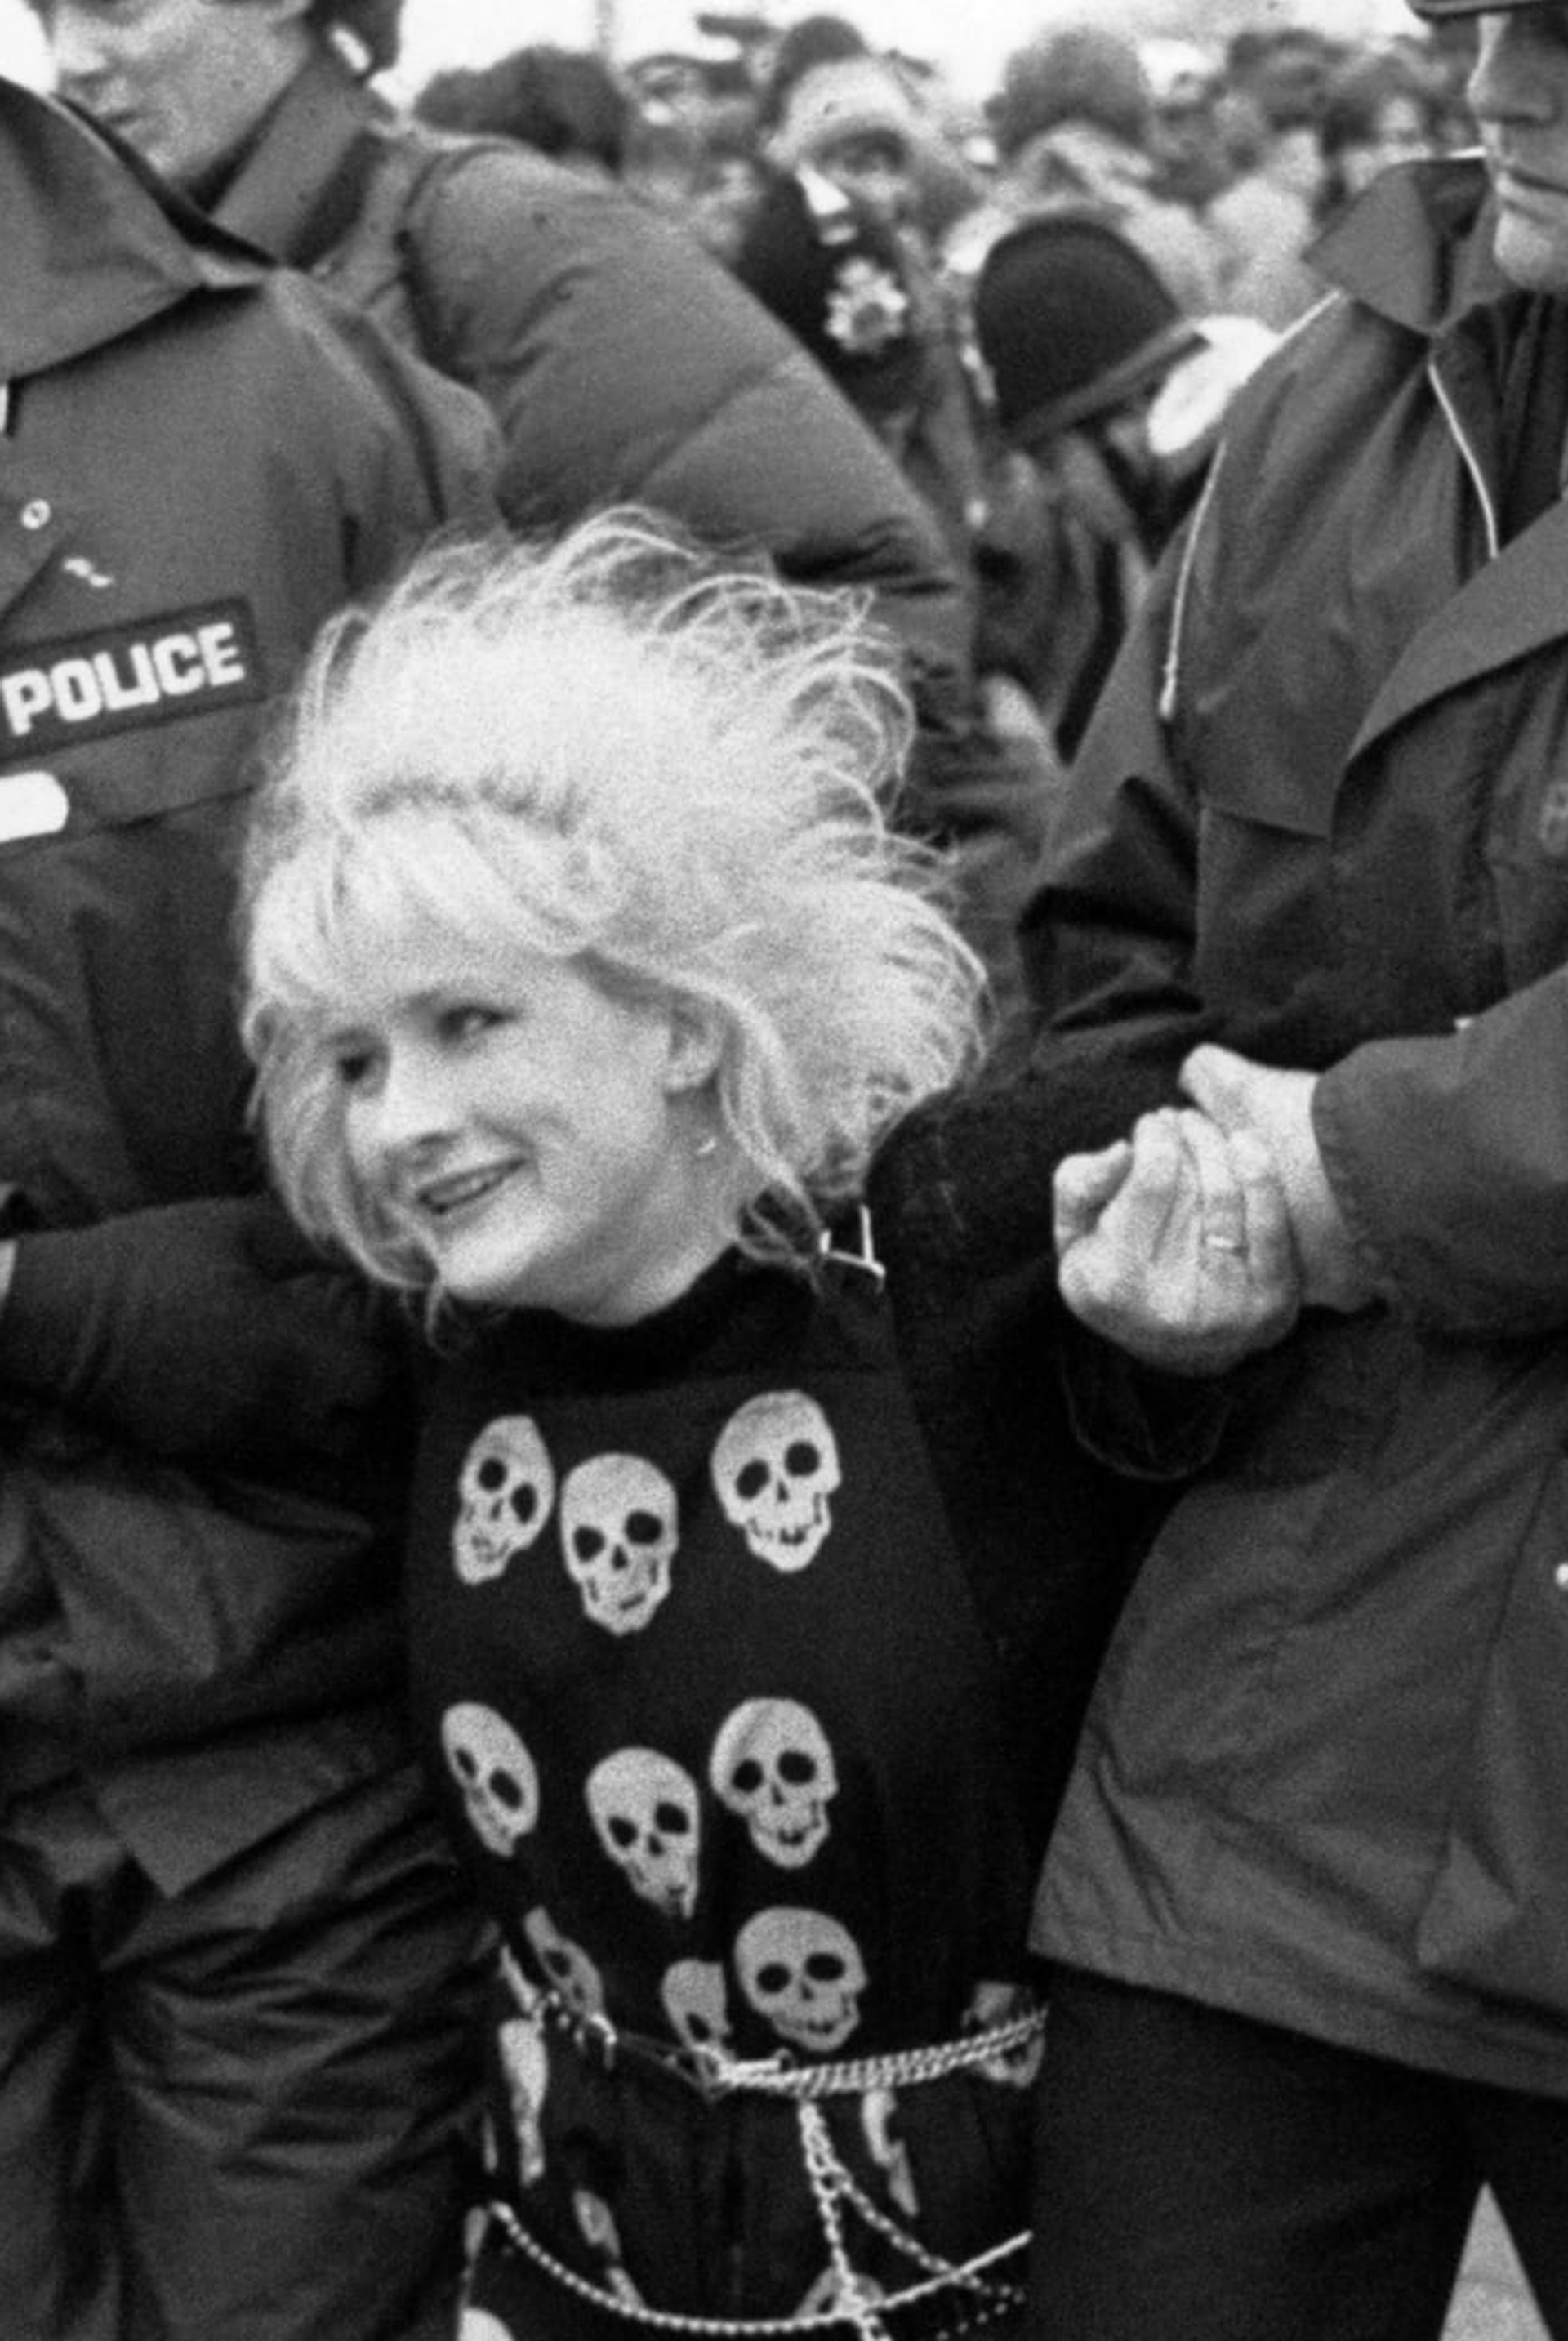 Black and white photograph, which looks as if it was taken in the 1970s or 1980s, of a smiling woman in a top covered in images of skulls, being dragged along by two uniformed British policemen. By Liz Murray